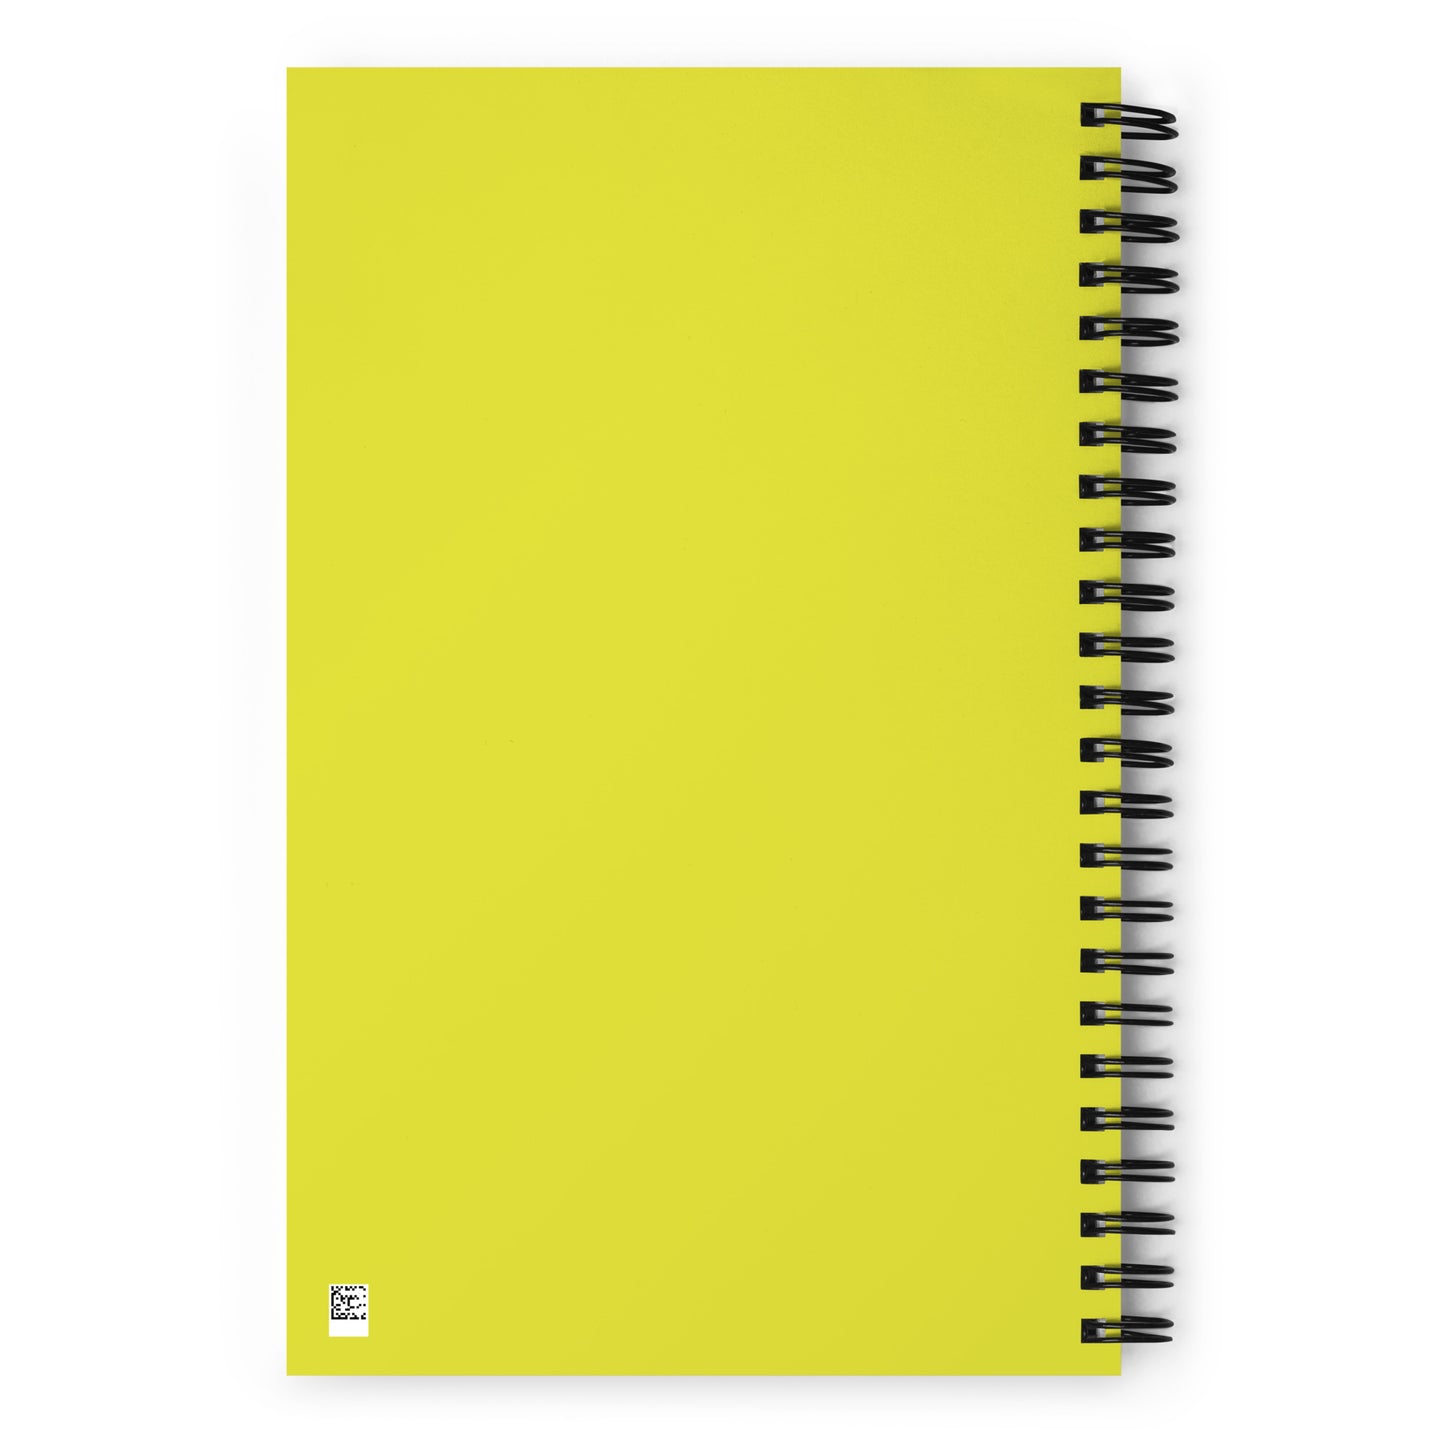 Aviation Gift Spiral Notebook - Yellow • YZR Sarnia • YHM Designs - Image 02